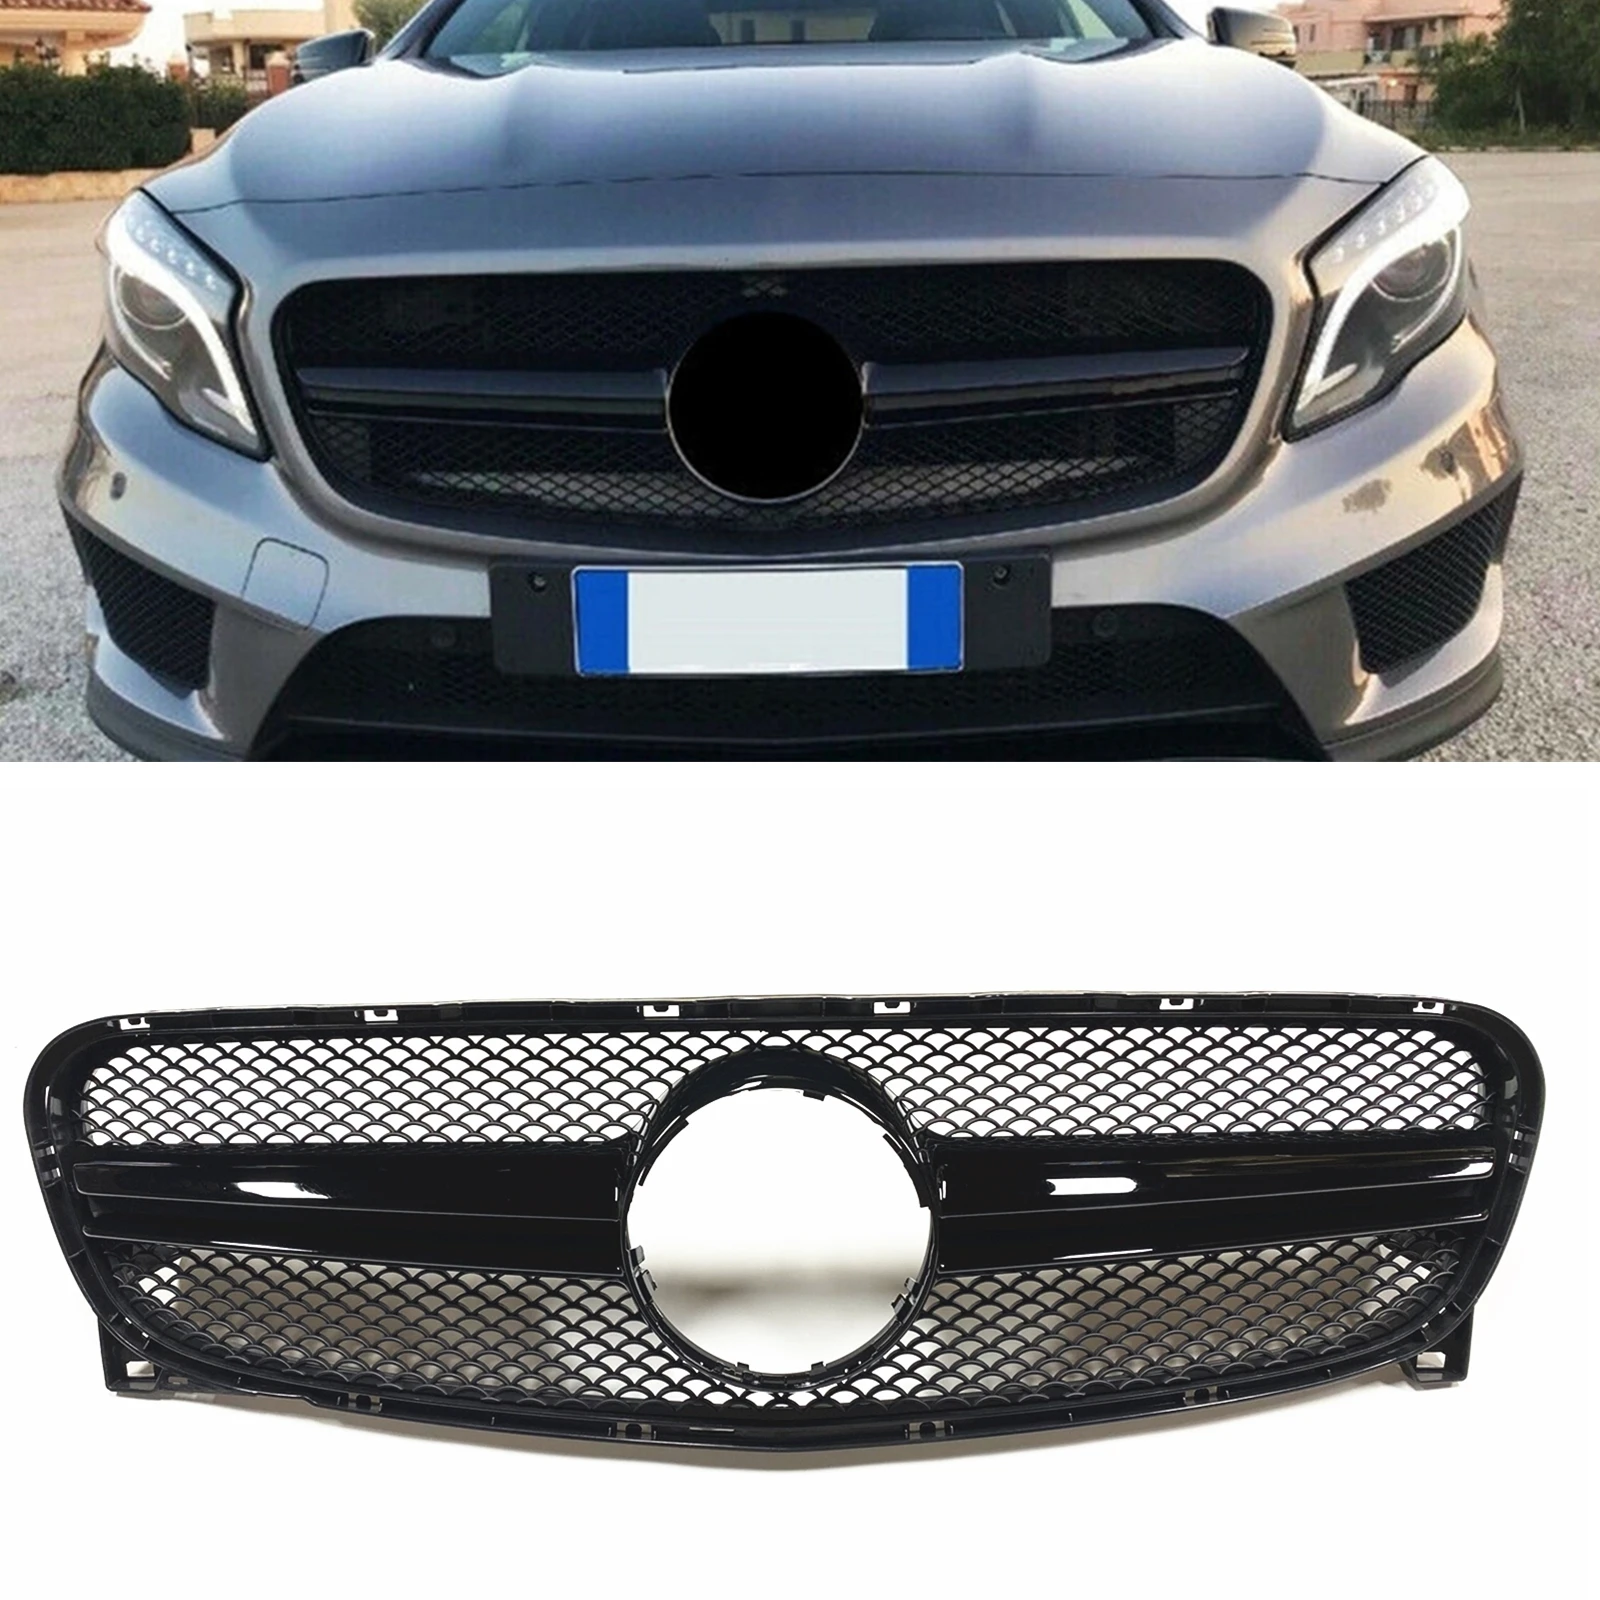 

Car Front Grille Grill Upper Replacement Bumper Hood Mesh Auto Body For Mercedes Benz GLA X156 GLA45 GLA250 GLA200 2014-2016